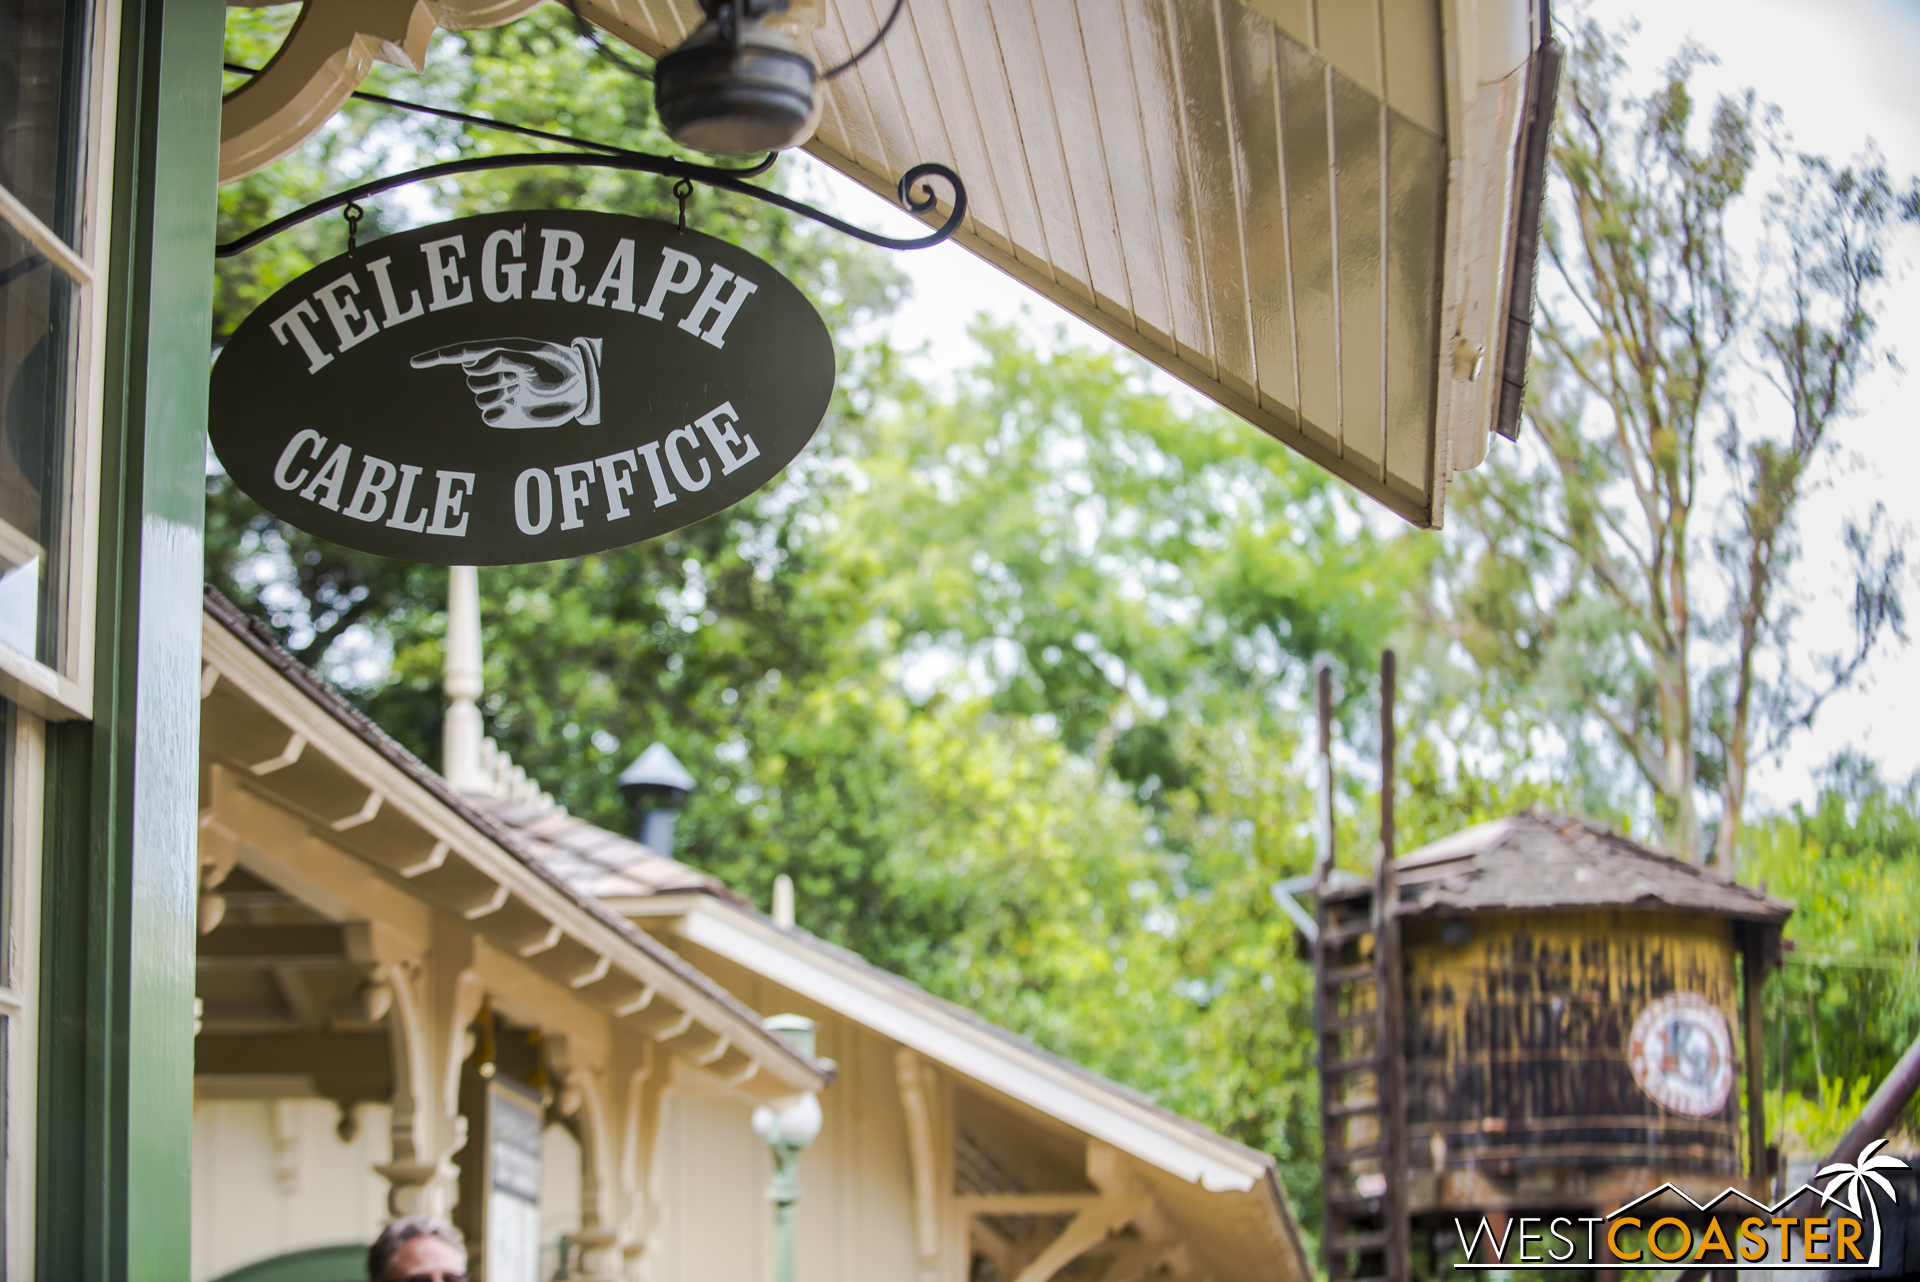  Here's the telegraph office where the morse code of Walt Disney's Disneyland opening day speech is broadcast. 